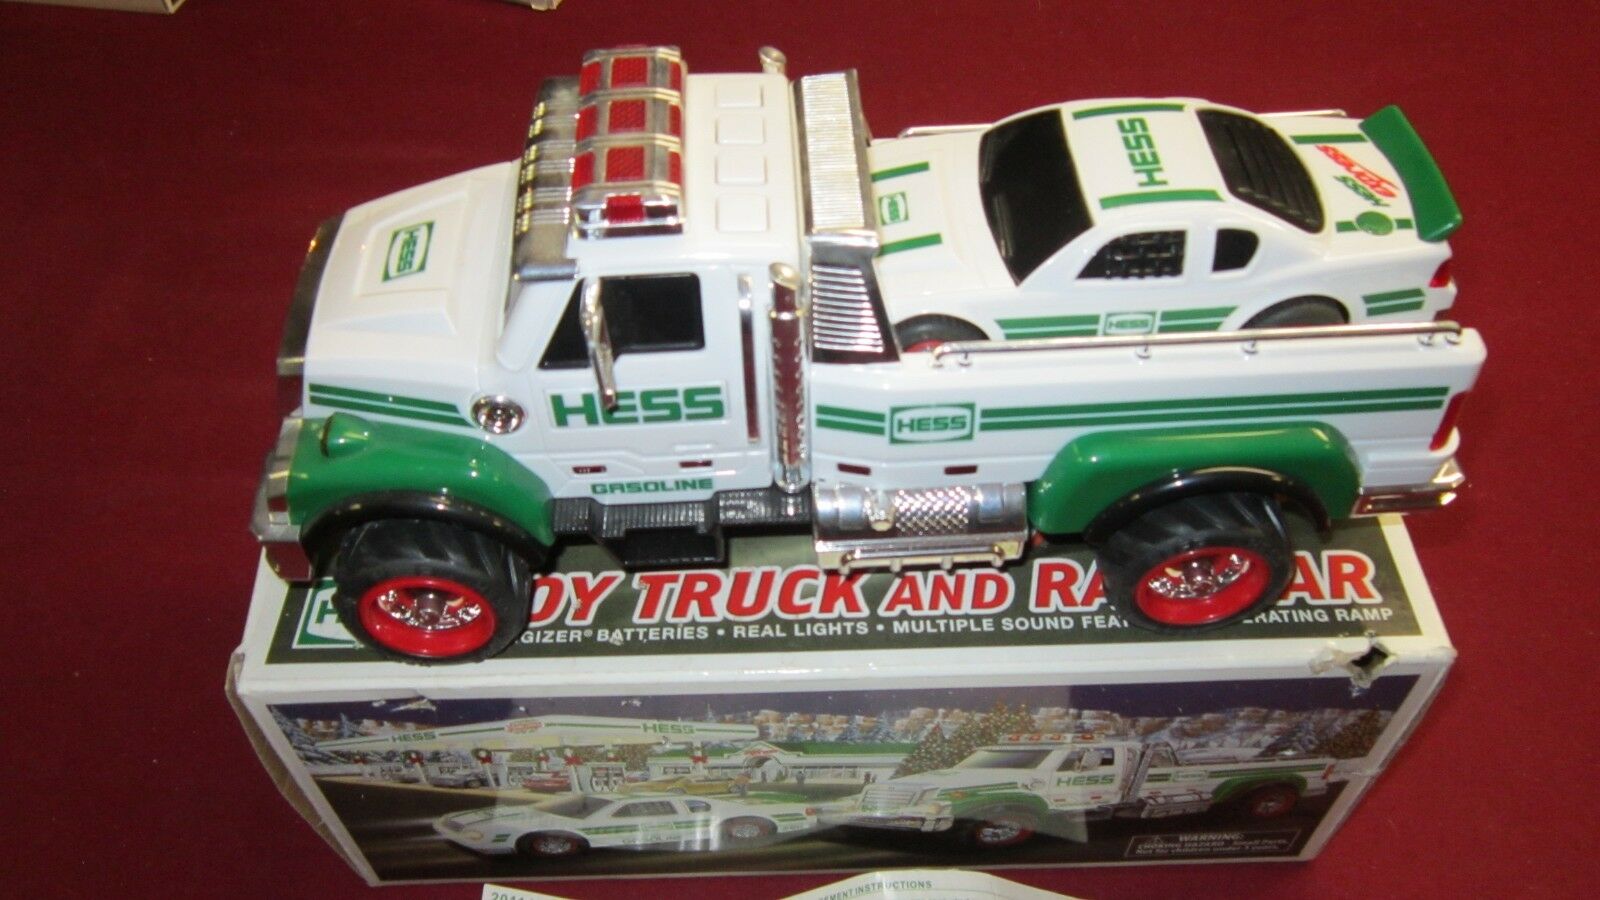 2011 Hess Toy And Race Car.